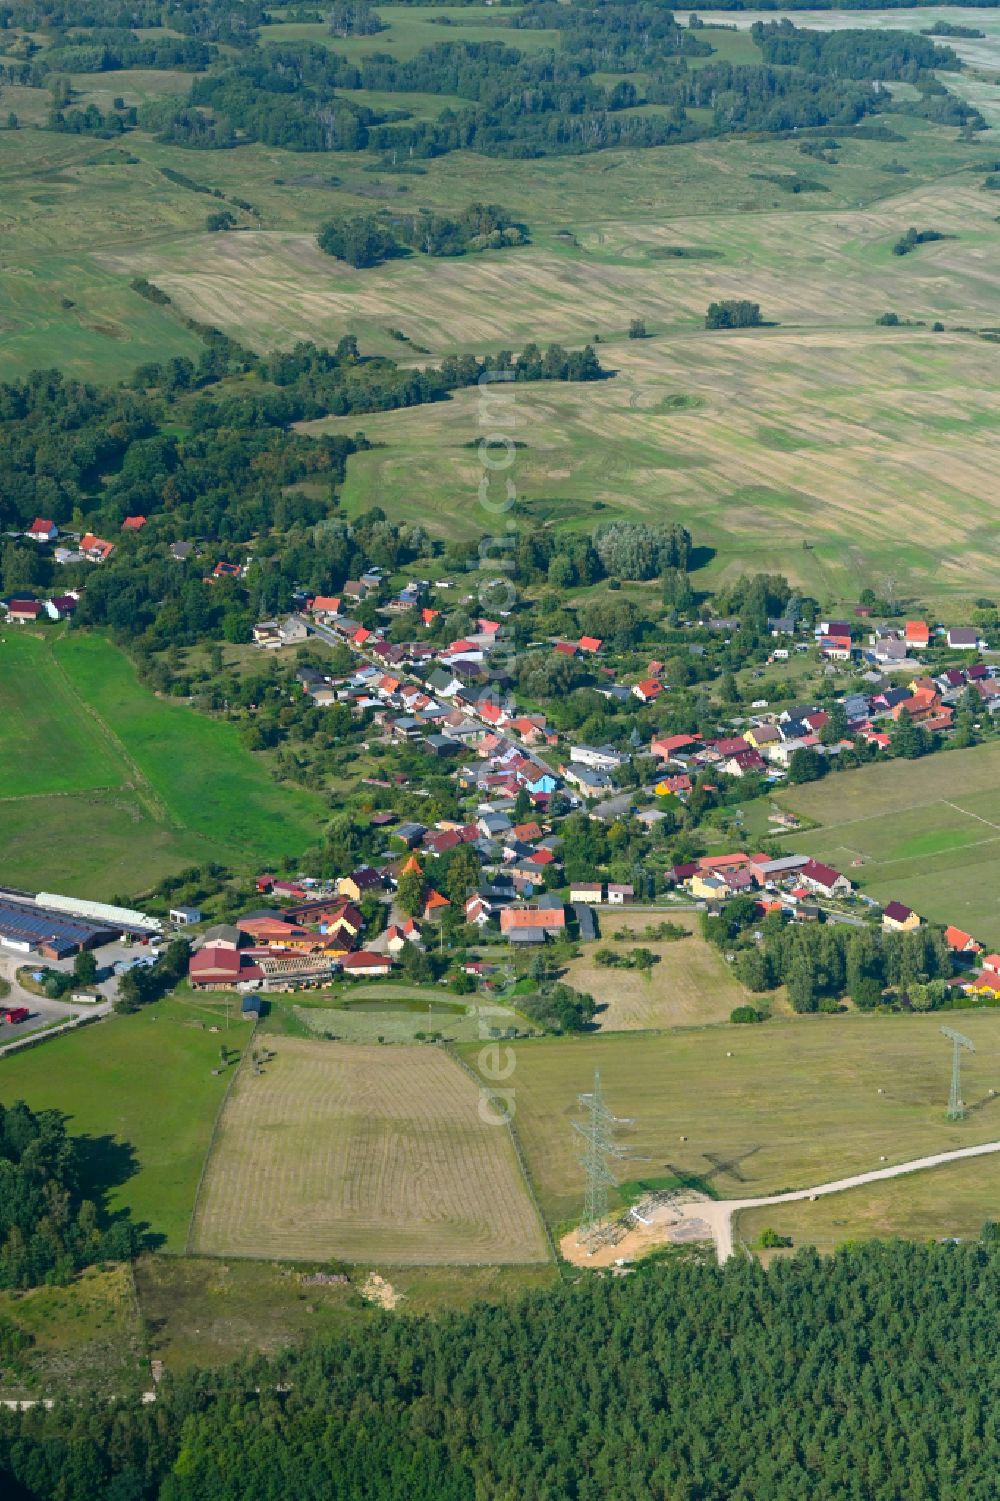 Chorin from the bird's eye view: Village - view on the edge of forested areas in Chorin in the state Brandenburg, Germany